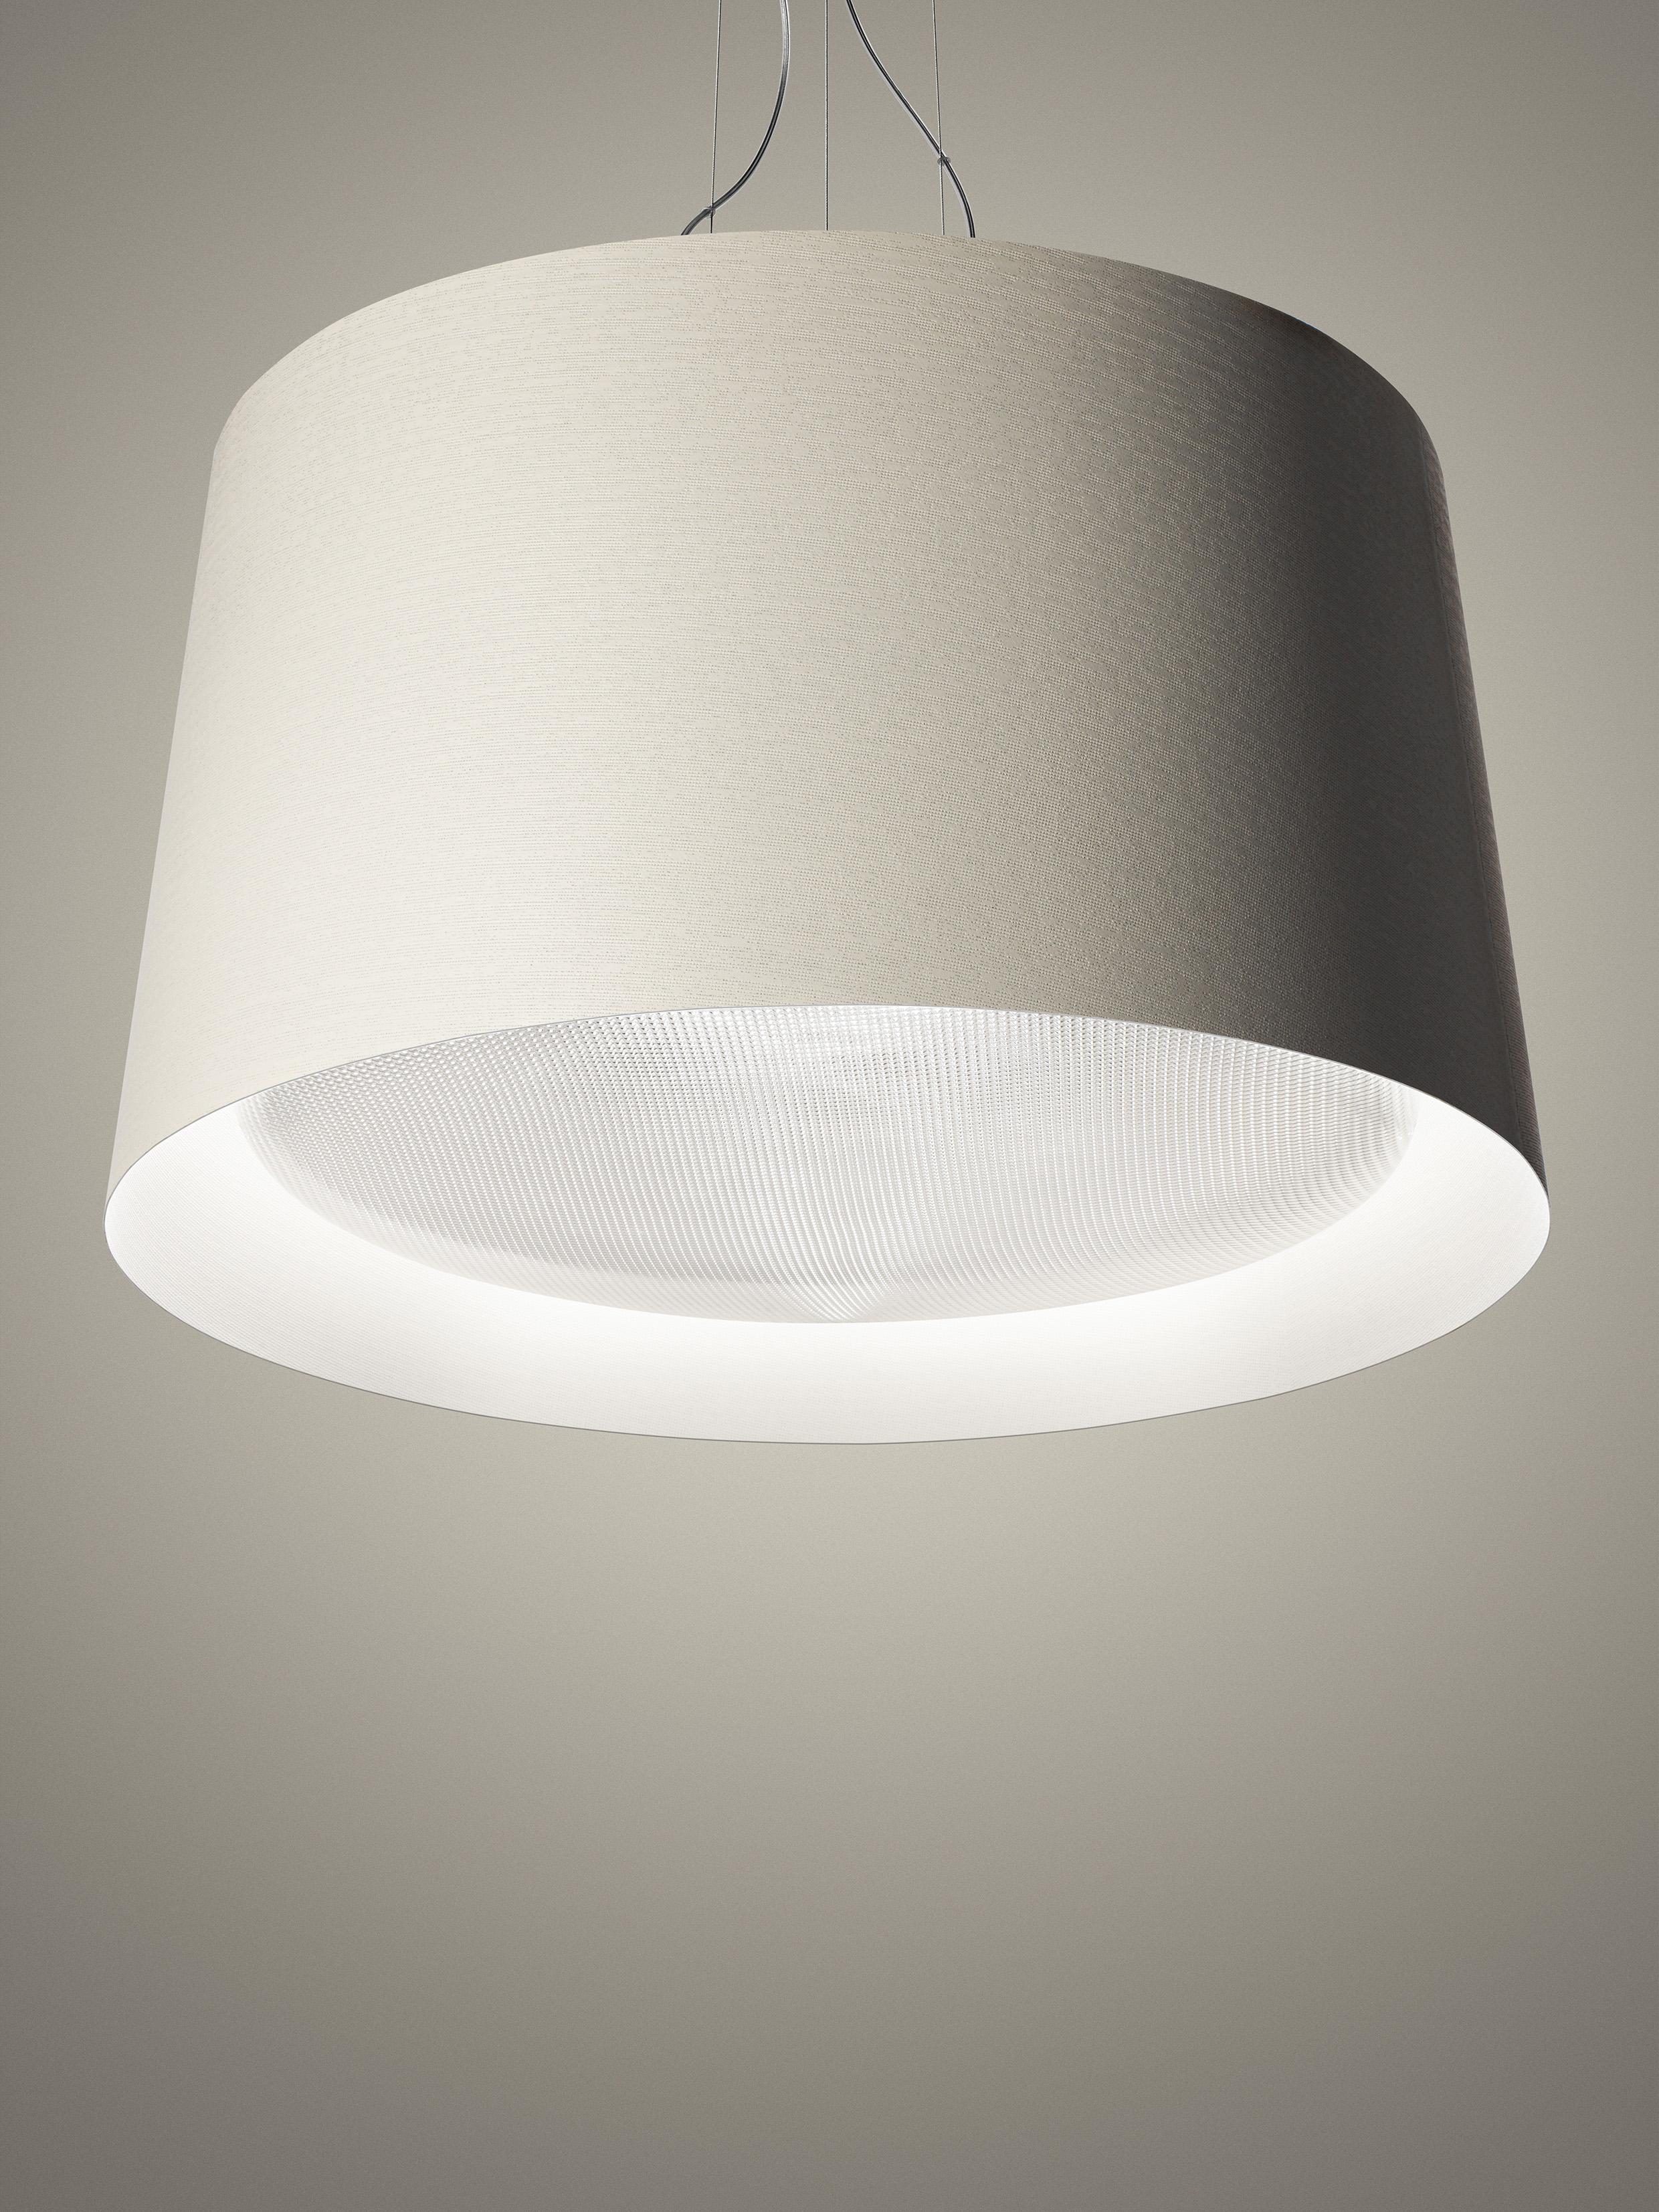 Large suspension lamp with direct and indirect up light. Diffuser made of fiberglass-based composite material and liquid coated. The lamp body consists of a large painted aluminium cone. The diffuser which tops o¬ the cone, where one of the two LED